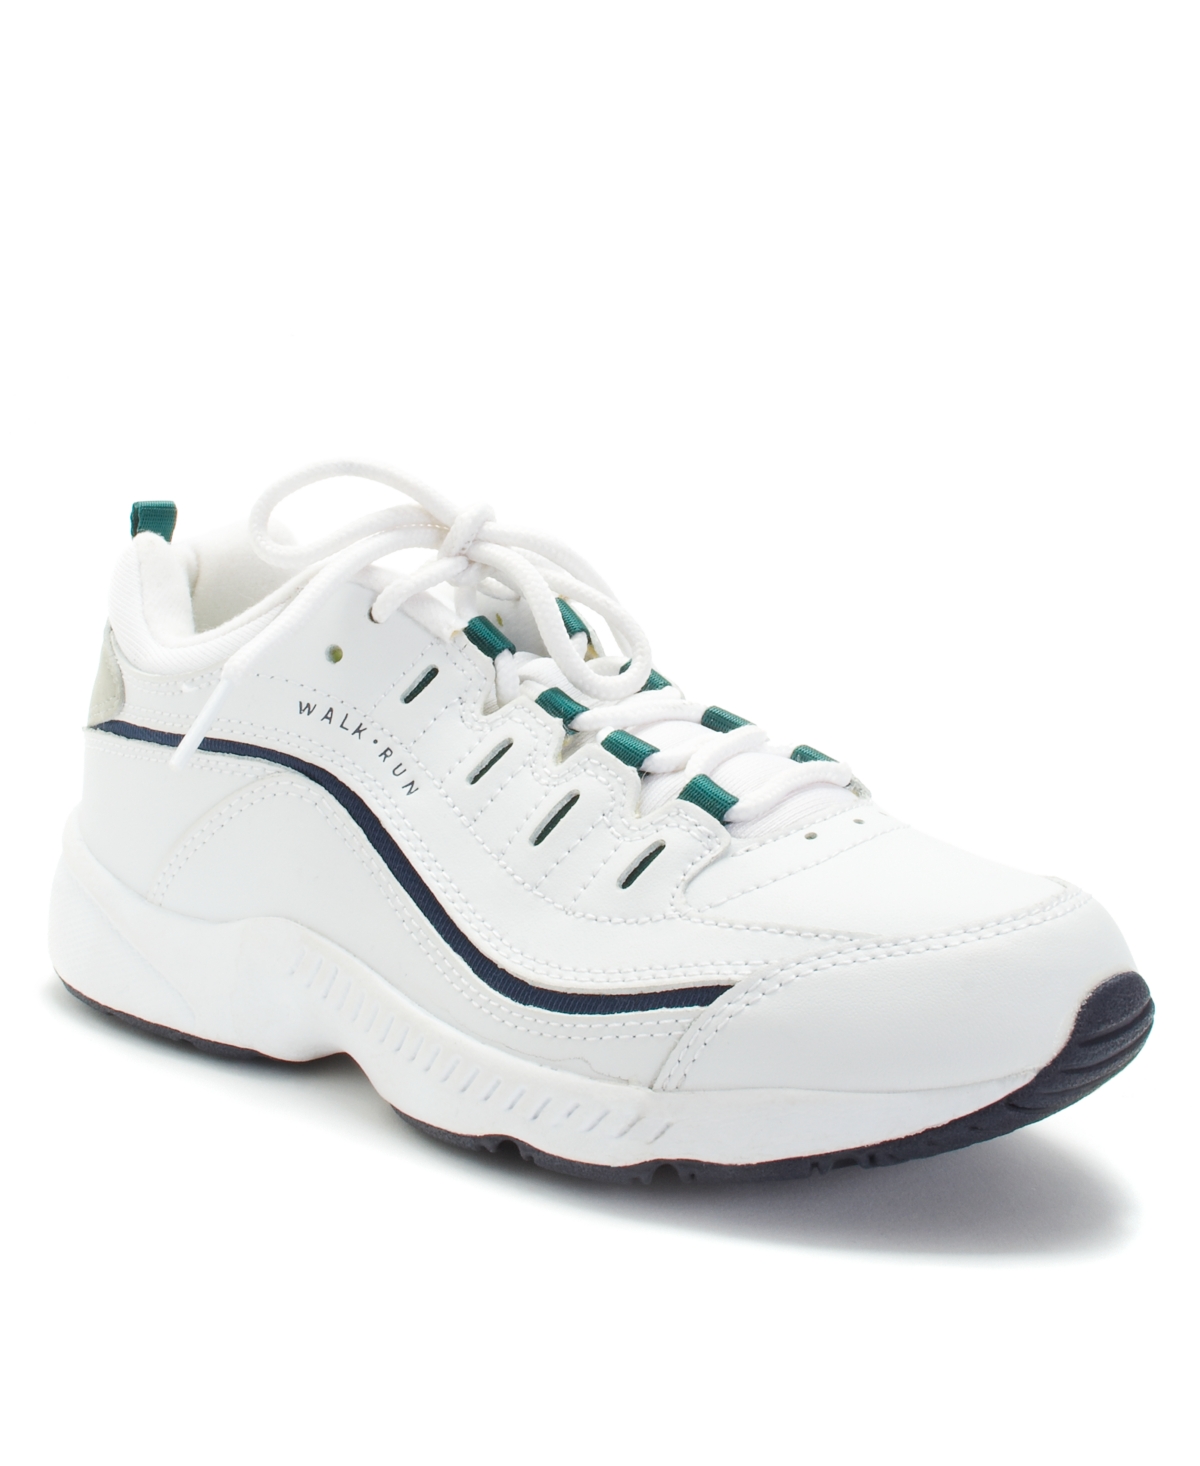 UPC 029005566014 product image for Easy Spirit Women's Romy Round Toe Casual Lace Up Walking Shoes Women's Shoes | upcitemdb.com